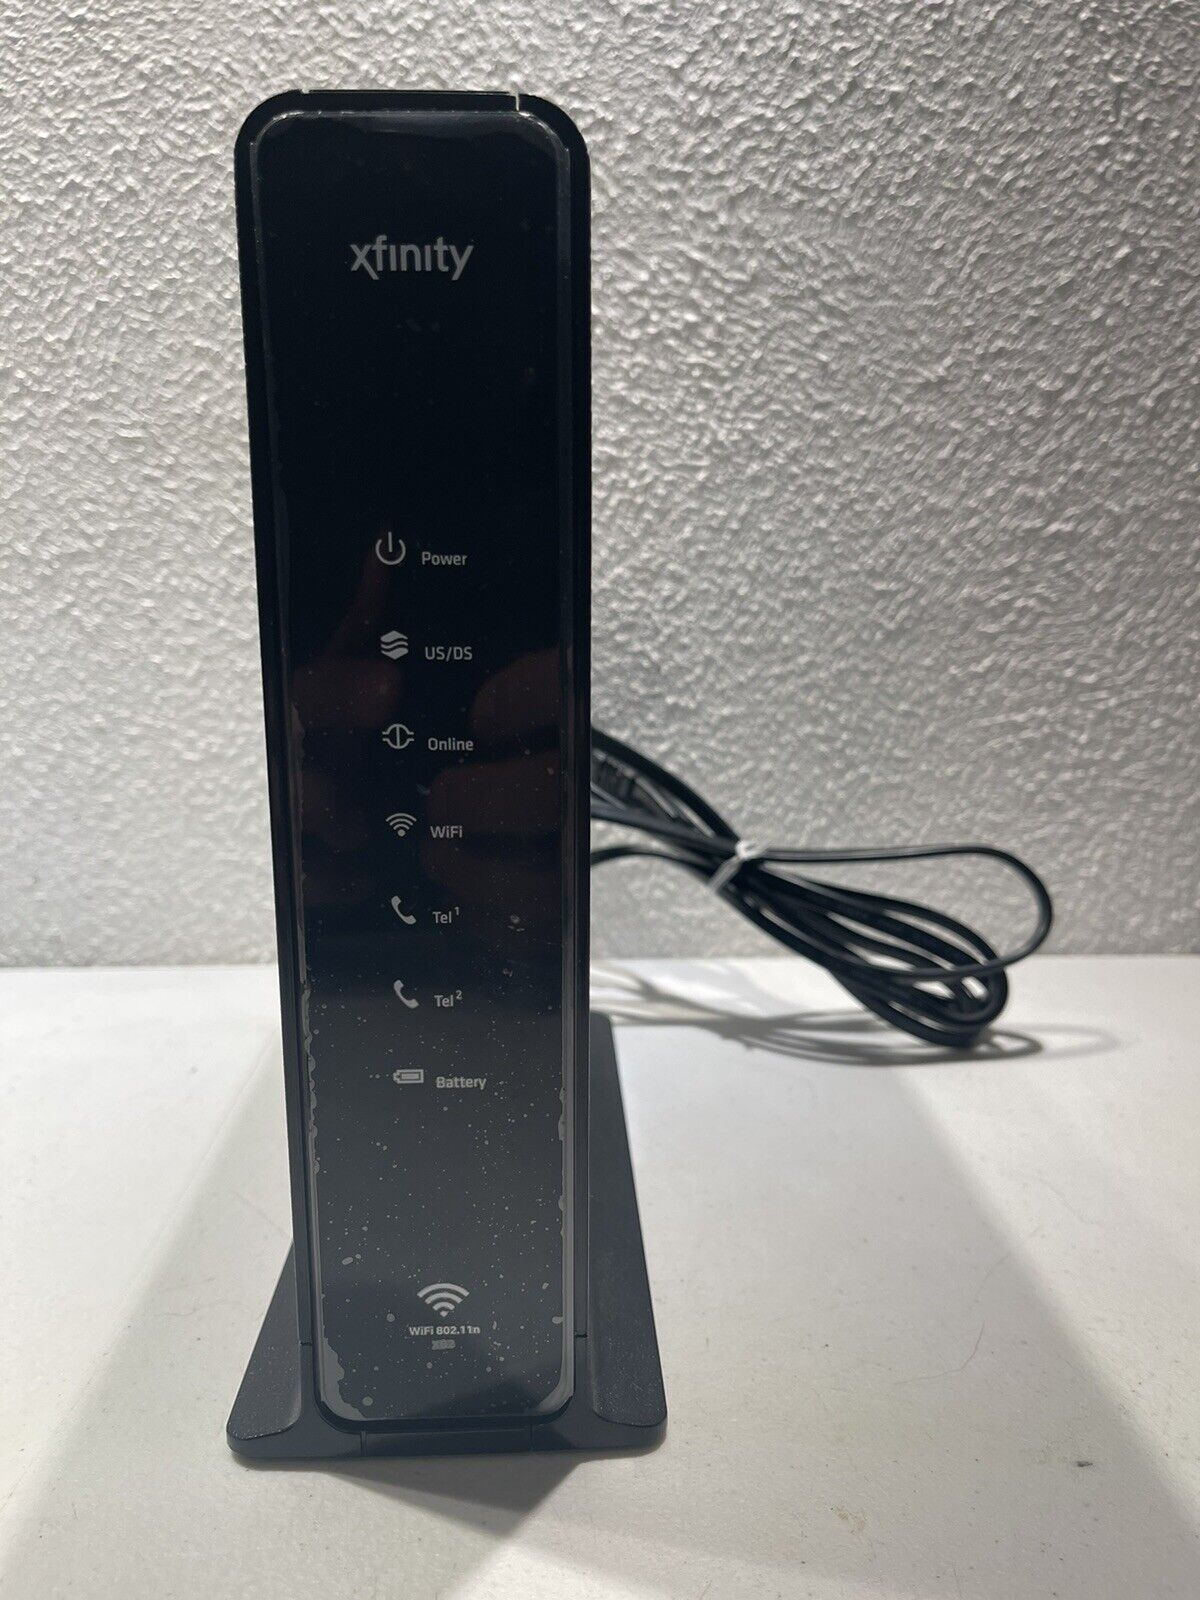 ARRIS TG862G/CT Xfinity Comcast Gateway and Router 802.11n wifi